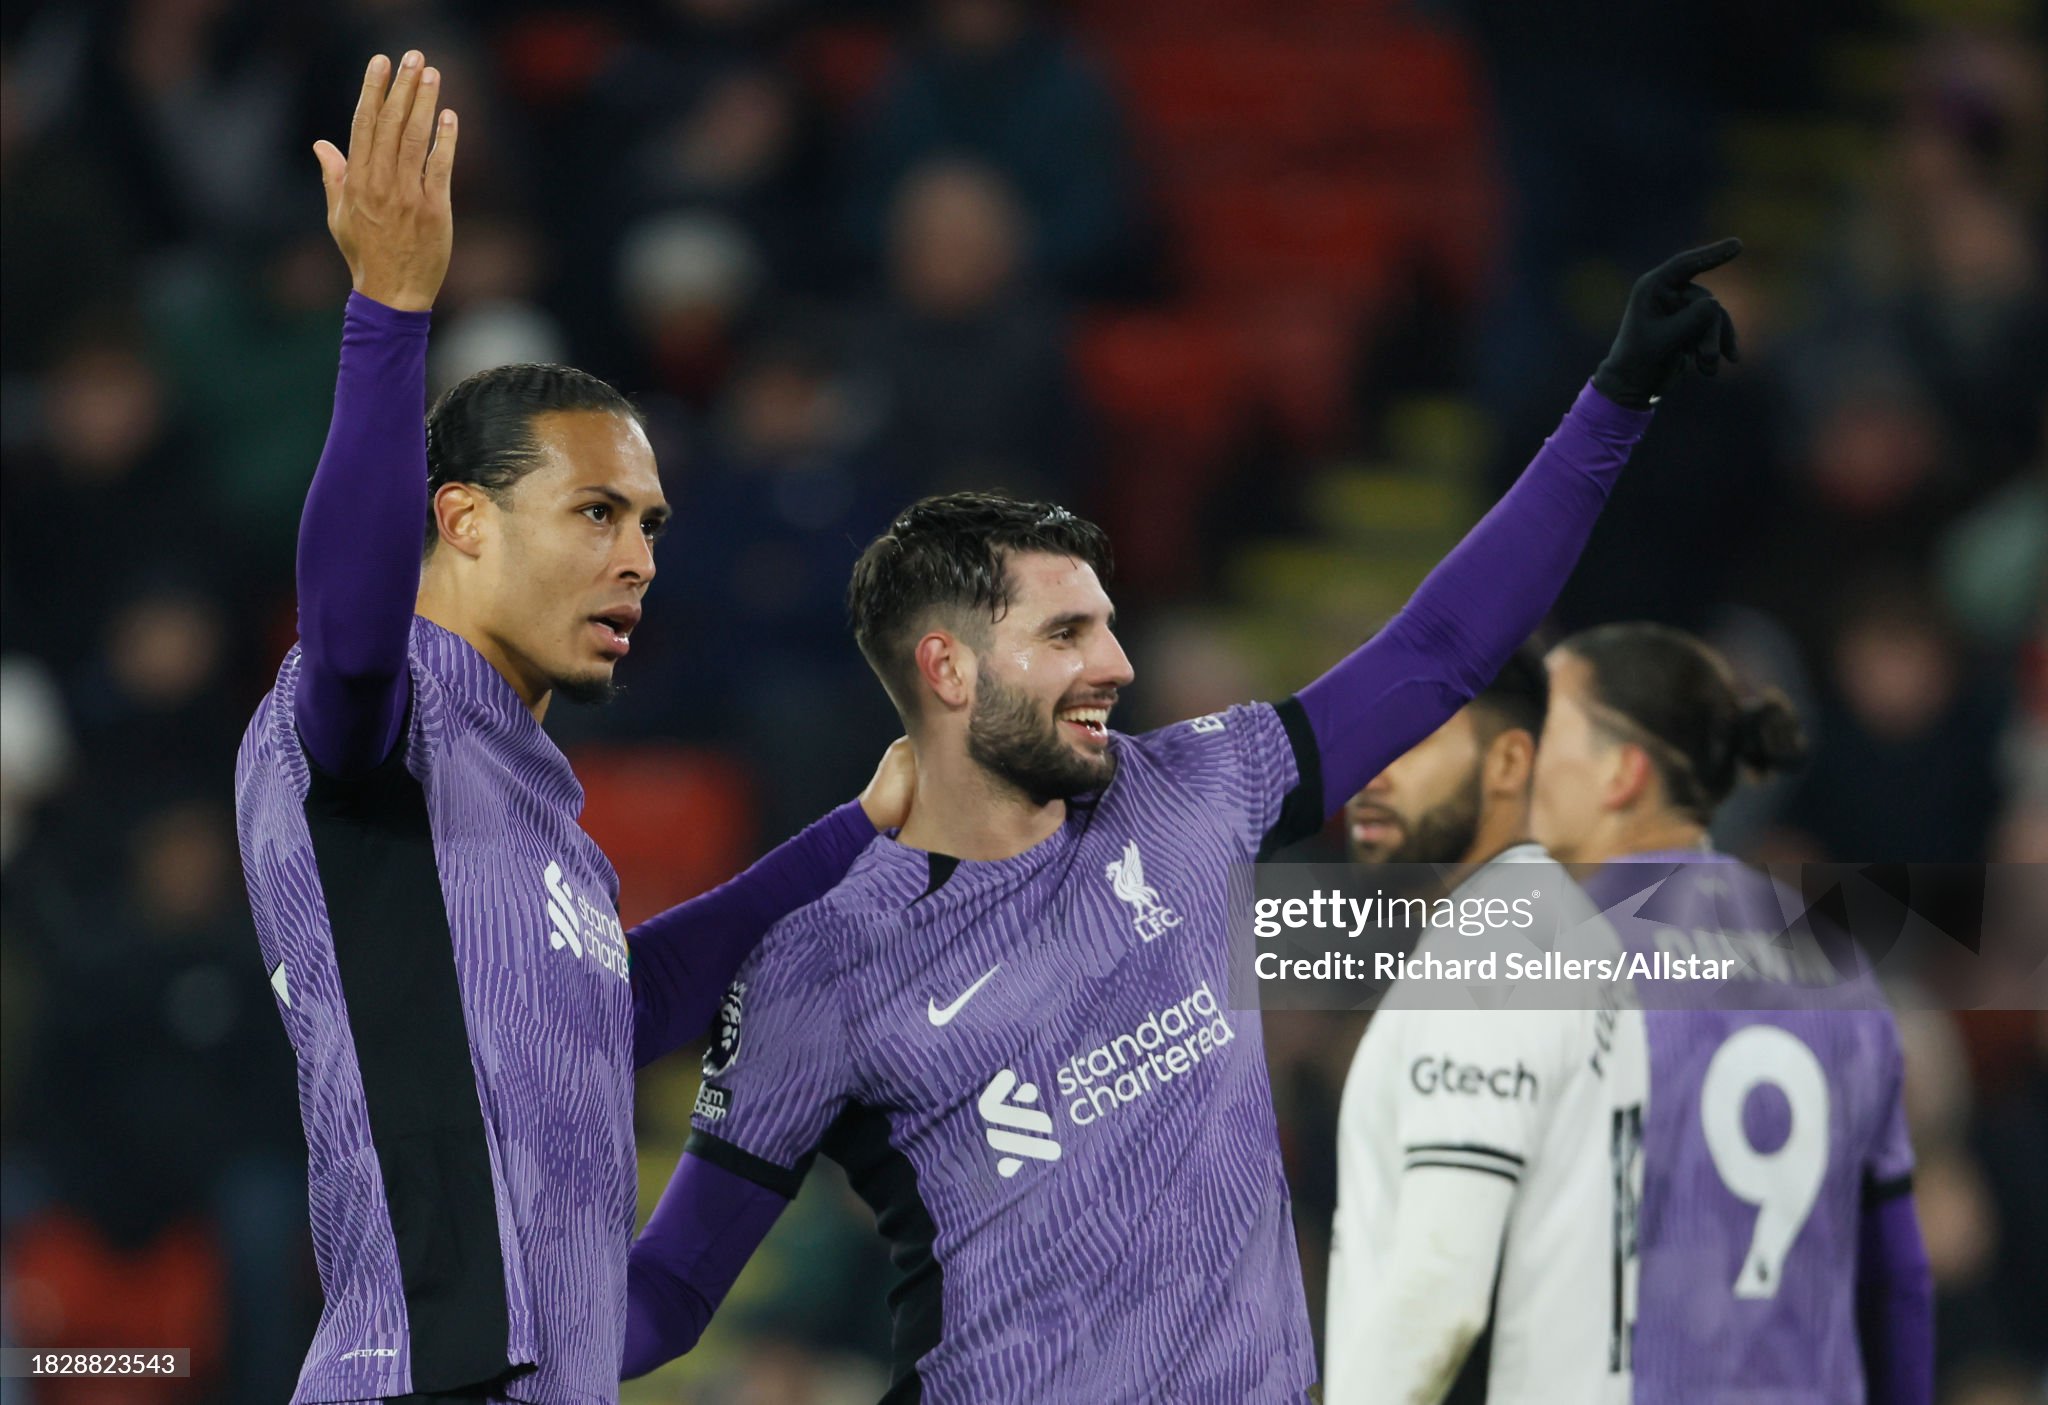 Liverpool capitalizes on Manchester City's slip-up with a goal from Van Dijk